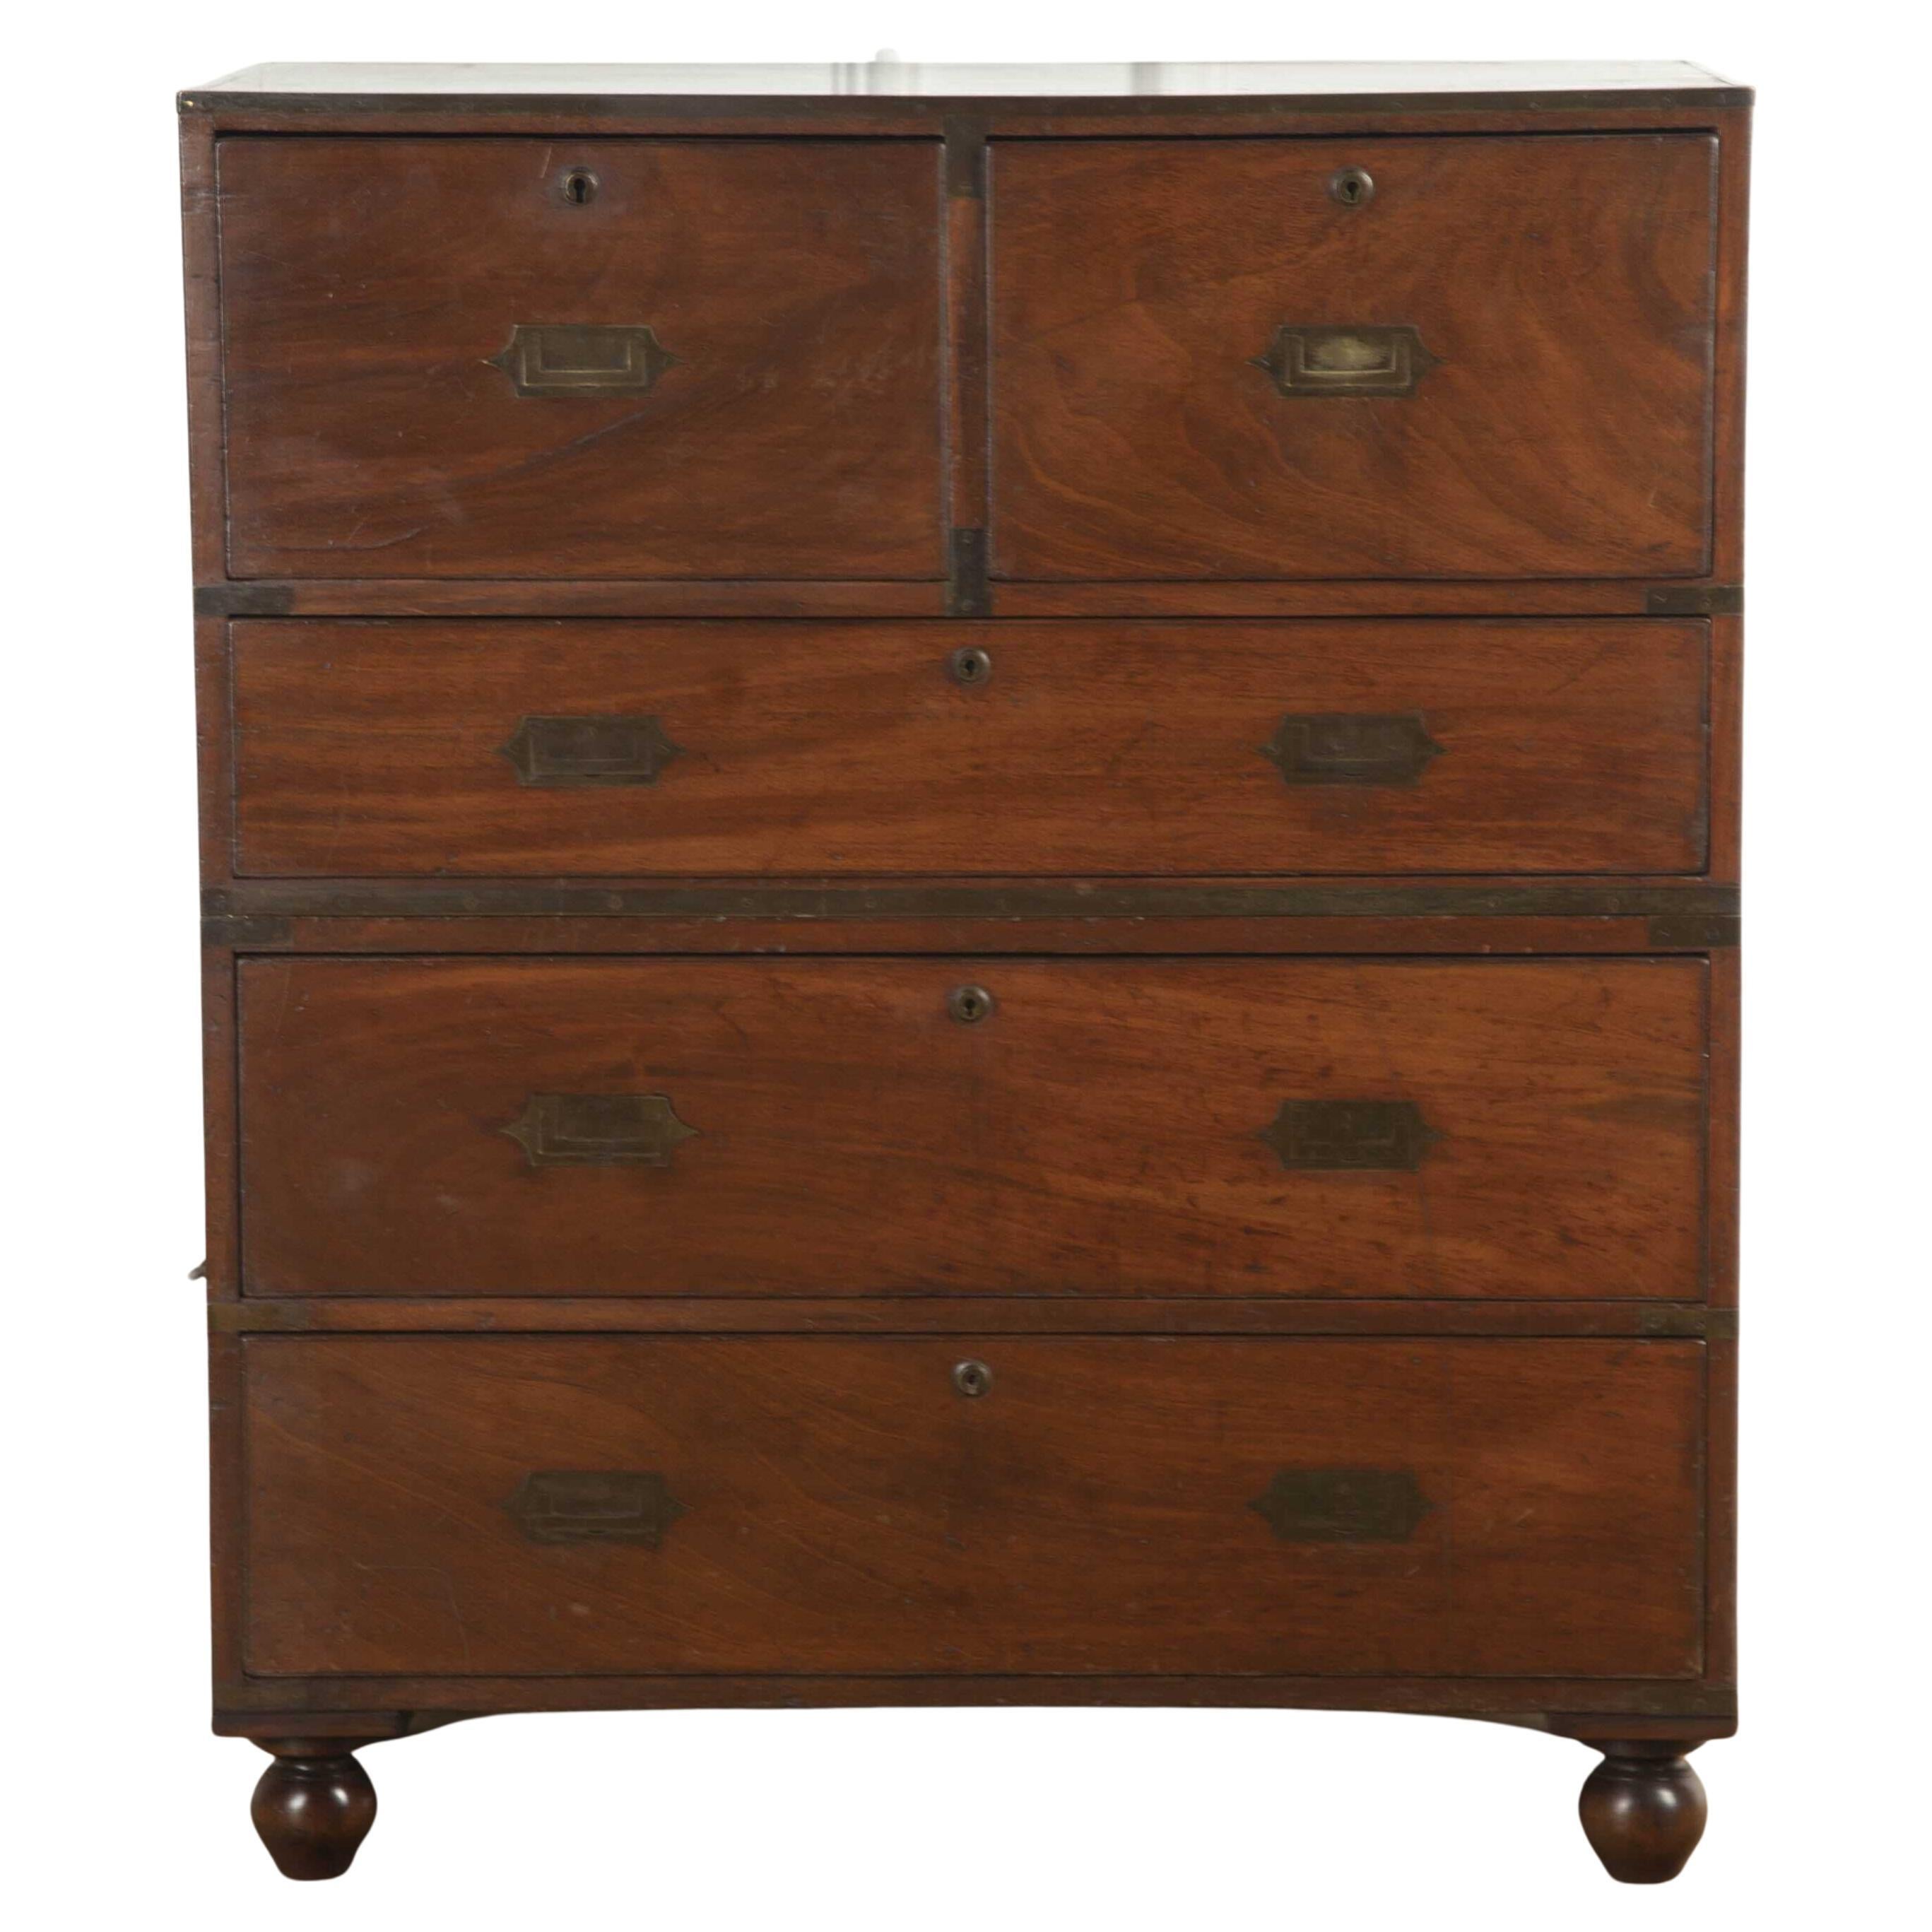 Early 19th Century Campaign Chest of Drawers